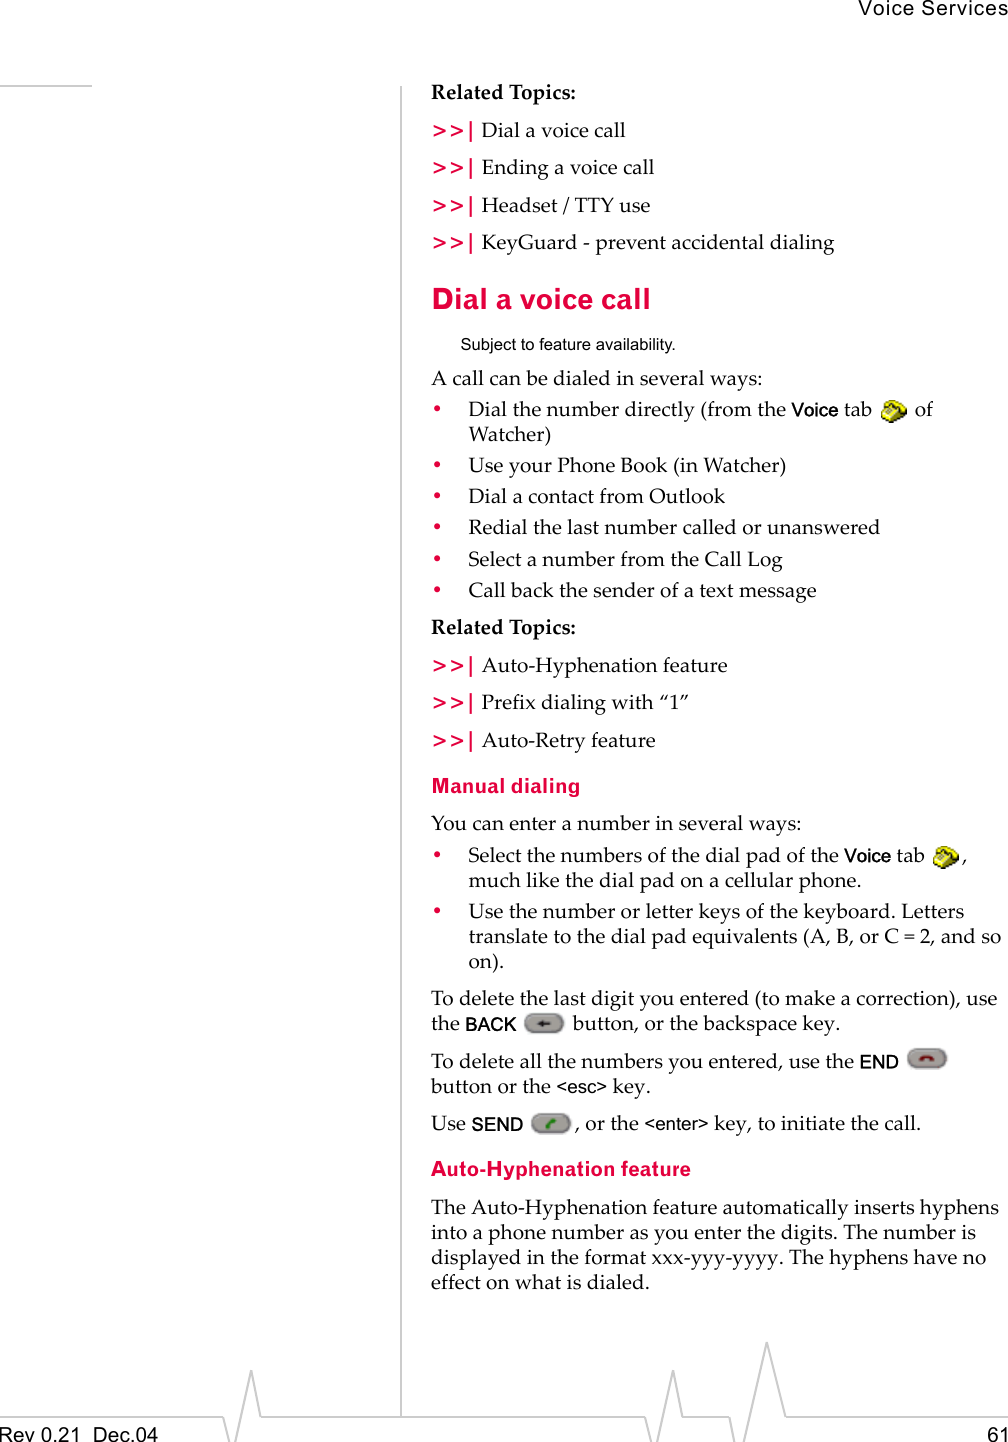 Voice ServicesRev 0.21  Dec.04 61Related Topics:&gt;&gt;| Dial a voice call&gt;&gt;| Ending a voice call&gt;&gt;| Headset / TTY use&gt;&gt;| KeyGuard - prevent accidental dialingDial a voice callSubject to feature availability.A call can be dialed in several ways:•Dial the number directly (from the Voice tab   of Watcher)•Use your Phone Book (in Watcher)•Dial a contact from Outlook•Redial the last number called or unanswered•Select a number from the Call Log•Call back the sender of a text messageRelated Topics:&gt;&gt;| Auto-Hyphenation feature&gt;&gt;| Prefix dialing with “1”&gt;&gt;| Auto-Retry featureManual dialingYou can enter a number in several ways:•Select the numbers of the dial pad of the Voice tab  , much like the dial pad on a cellular phone.•Use the number or letter keys of the keyboard. Letters translate to the dial pad equivalents (A, B, or C = 2, and so on).To delete the last digit you entered (to make a correction), use the BACK   button, or the backspace key.To delete all the numbers you entered, use the END  button or the &lt;esc&gt; key.Use SEND  , or the &lt;enter&gt; key, to initiate the call.Auto-Hyphenation featureThe Auto-Hyphenation feature automatically inserts hyphens into a phone number as you enter the digits. The number is displayed in the format xxx-yyy-yyyy. The hyphens have no effect on what is dialed.